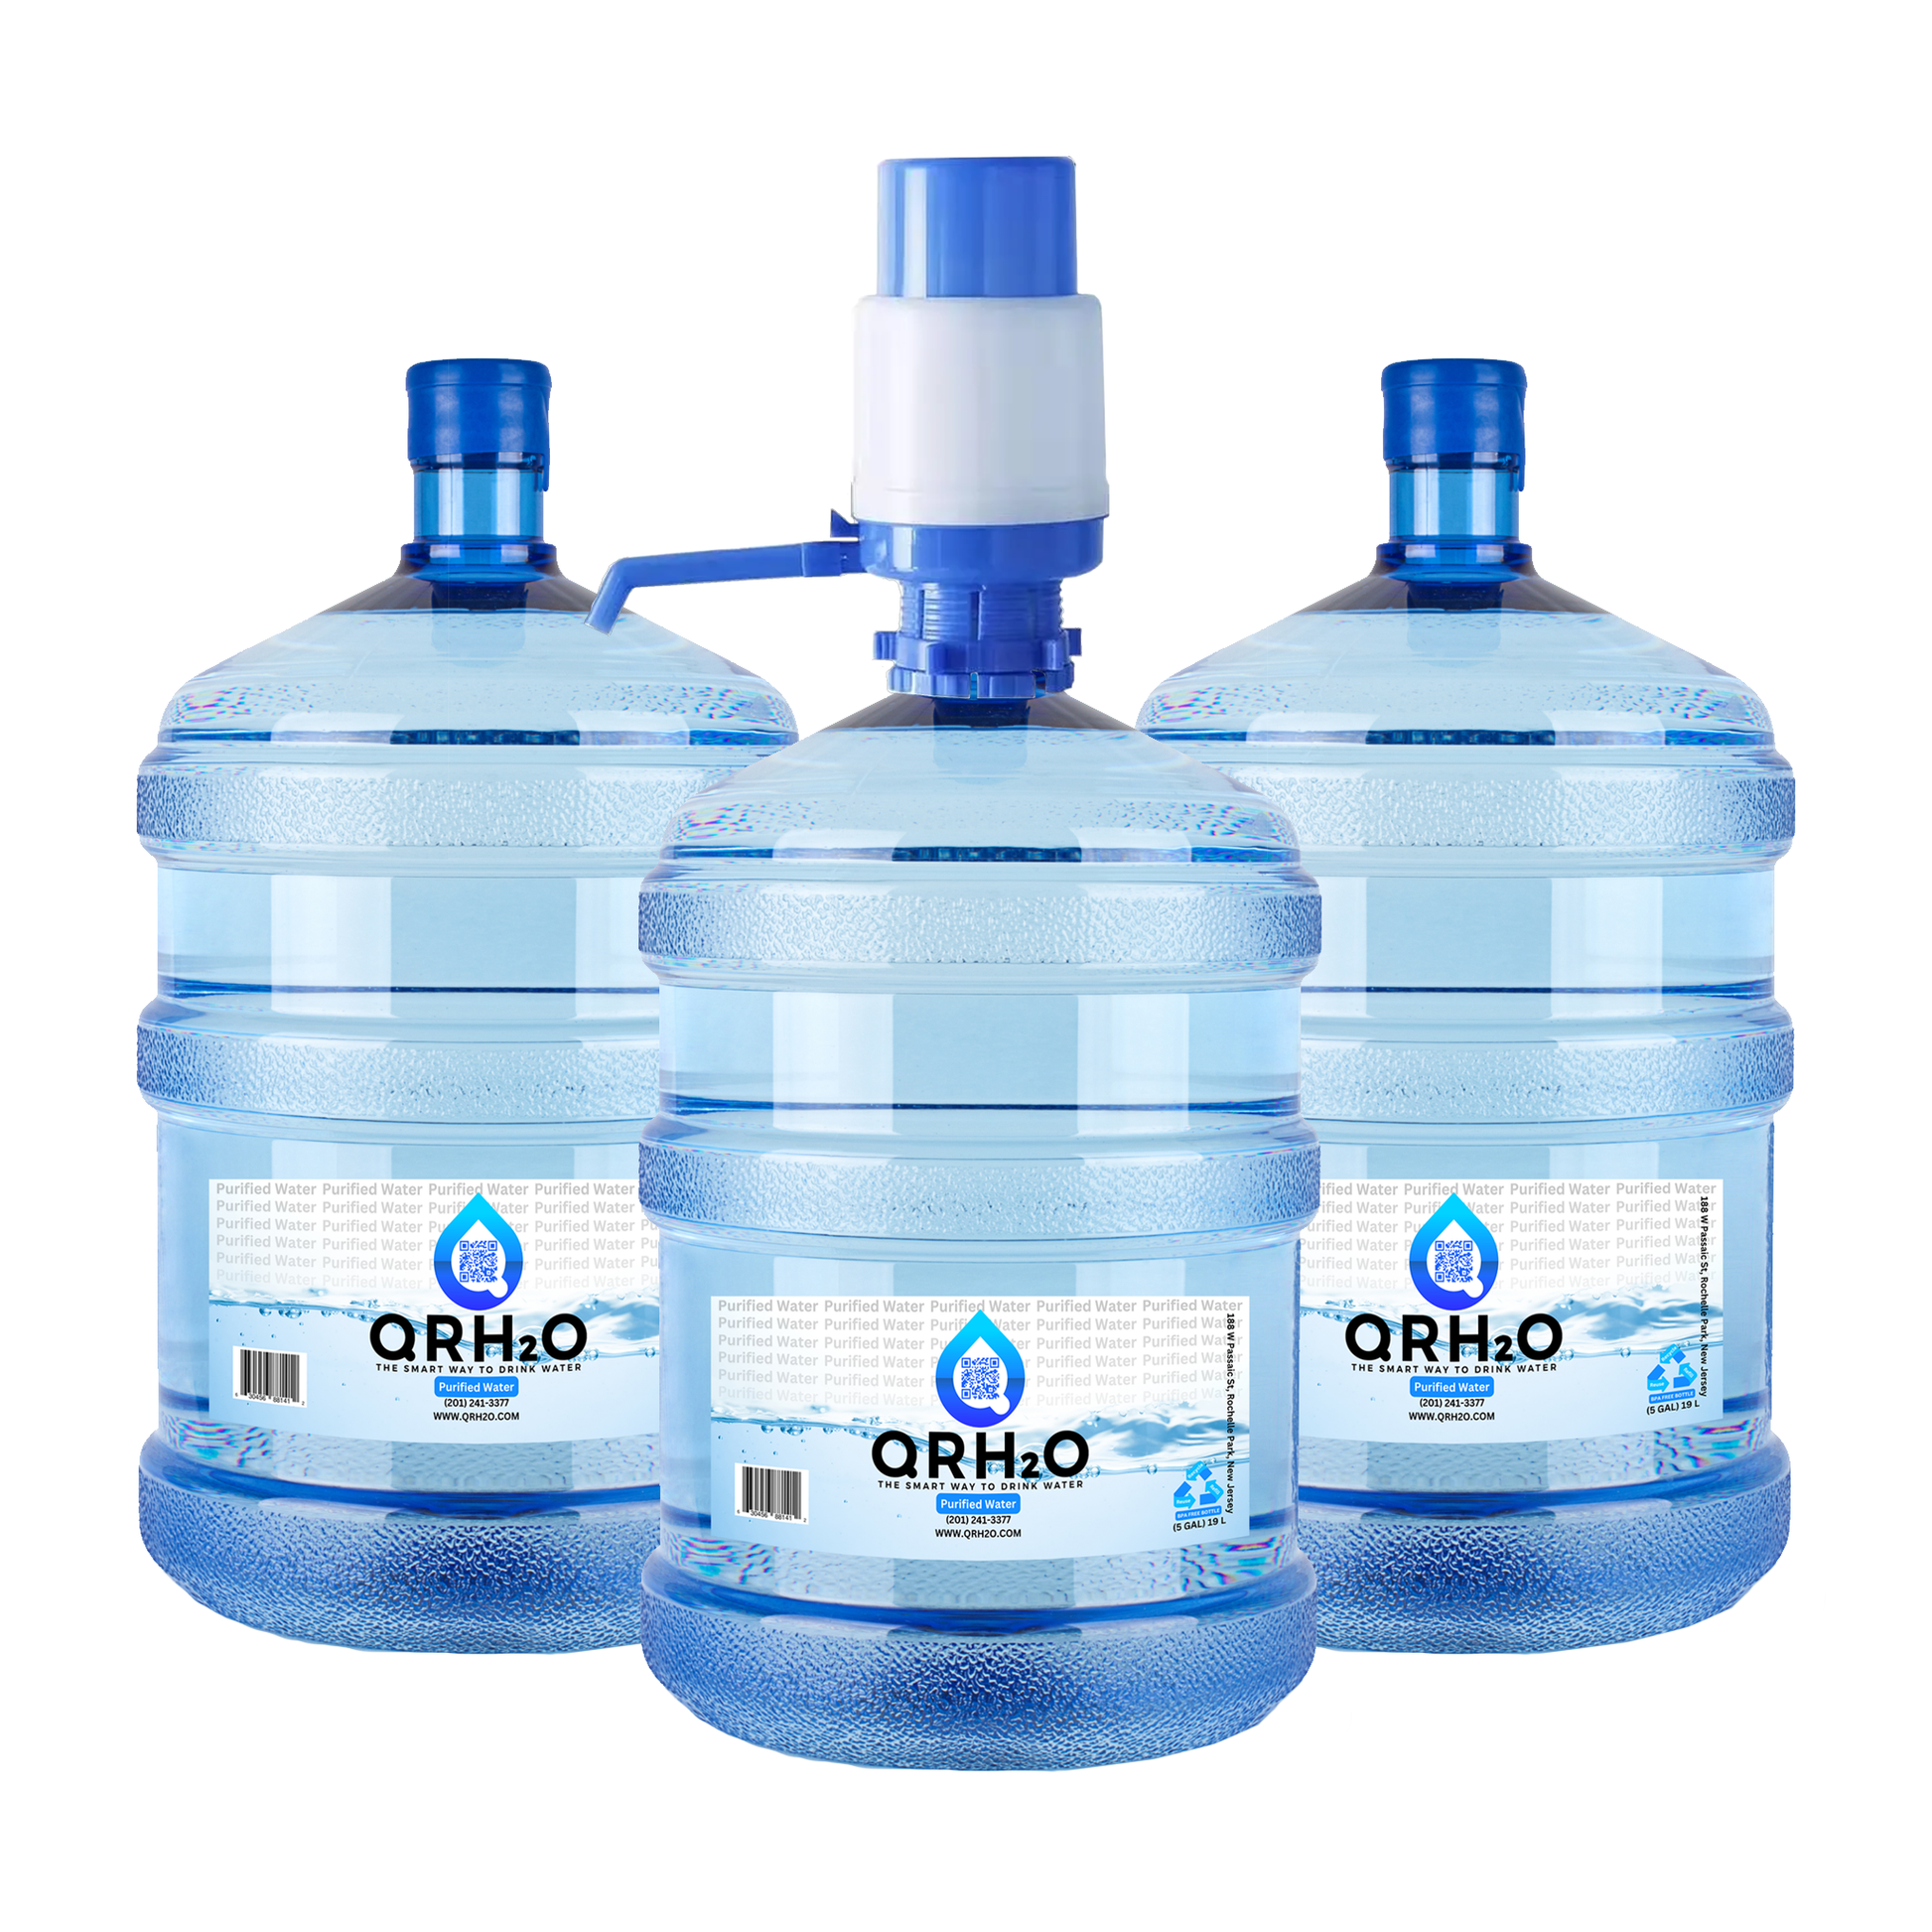 Stay Hydrated: Keep a supply of fresh water on hand with our 3-pack of 5-gallon water bottles, complete with a free manual hand pump for added convenience.